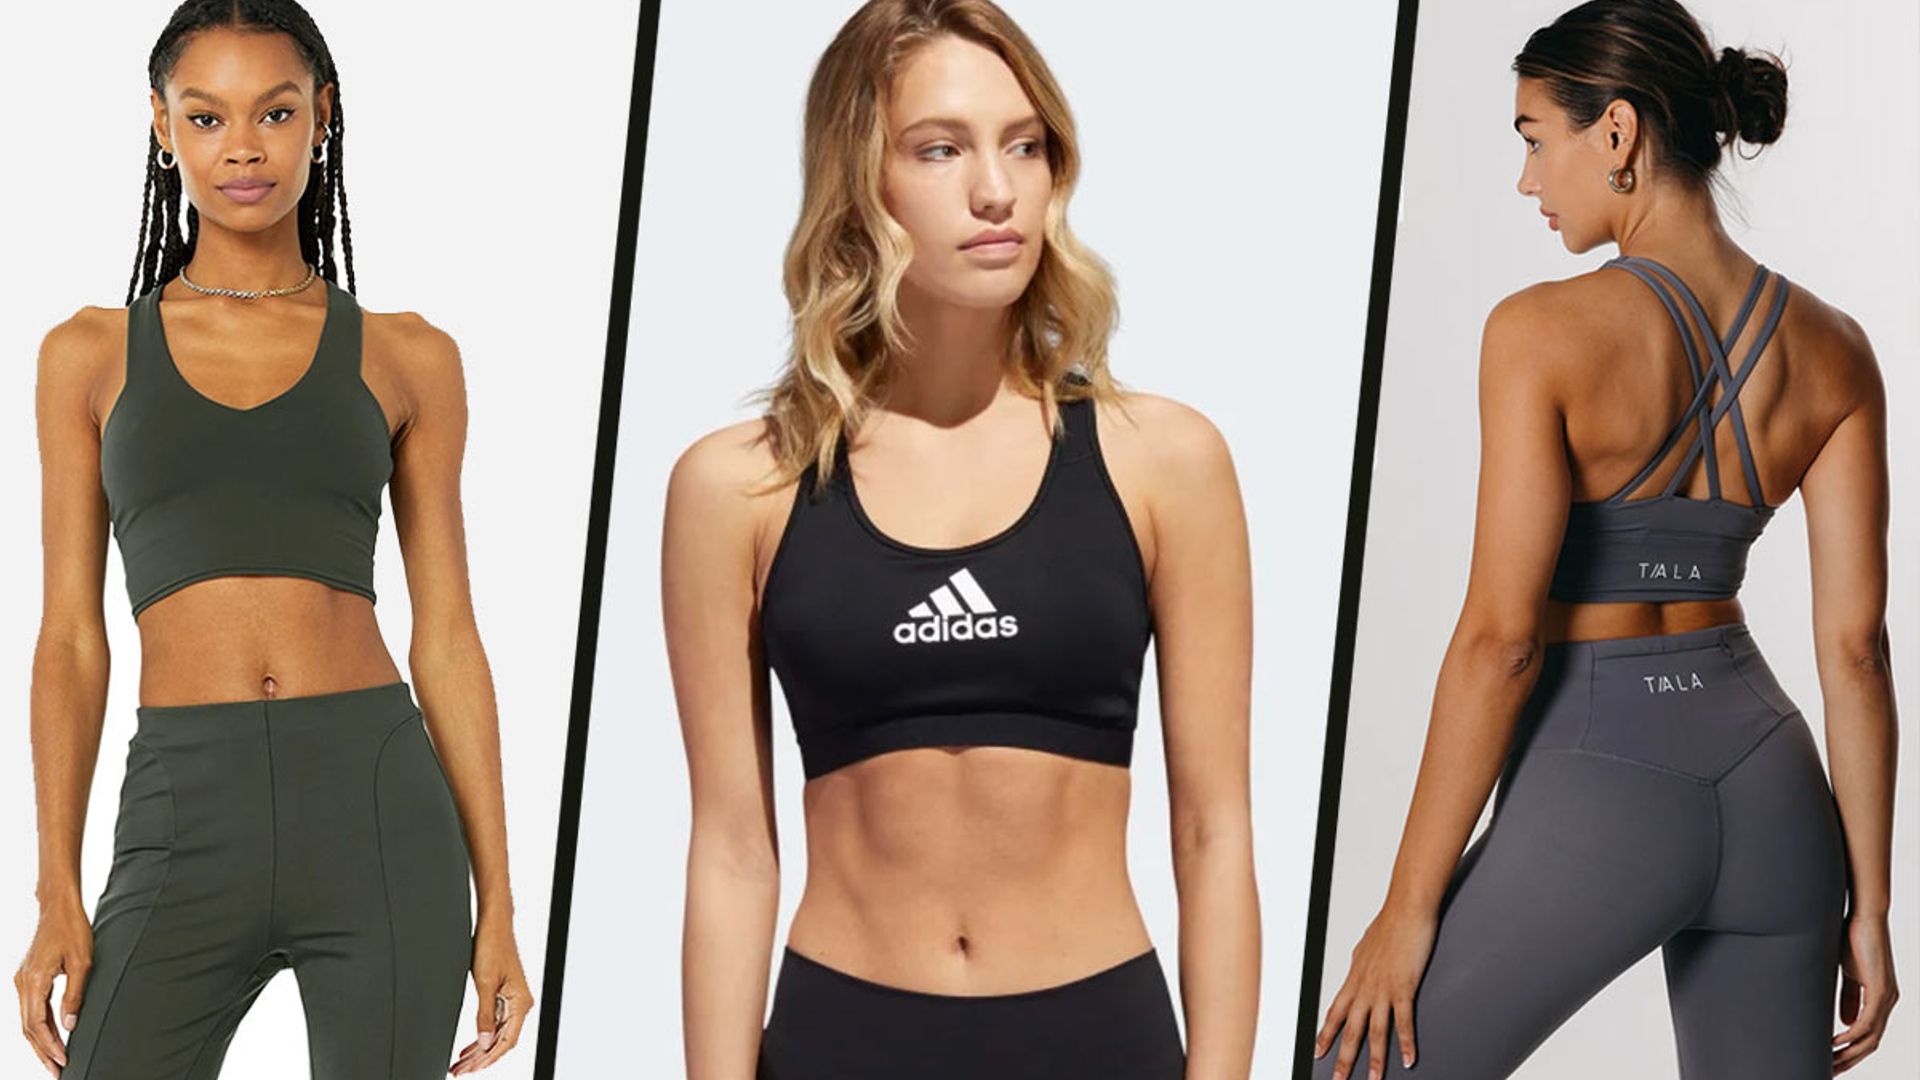 10 sports bras with the best reviews: From Marks & Spencer to Lululemon